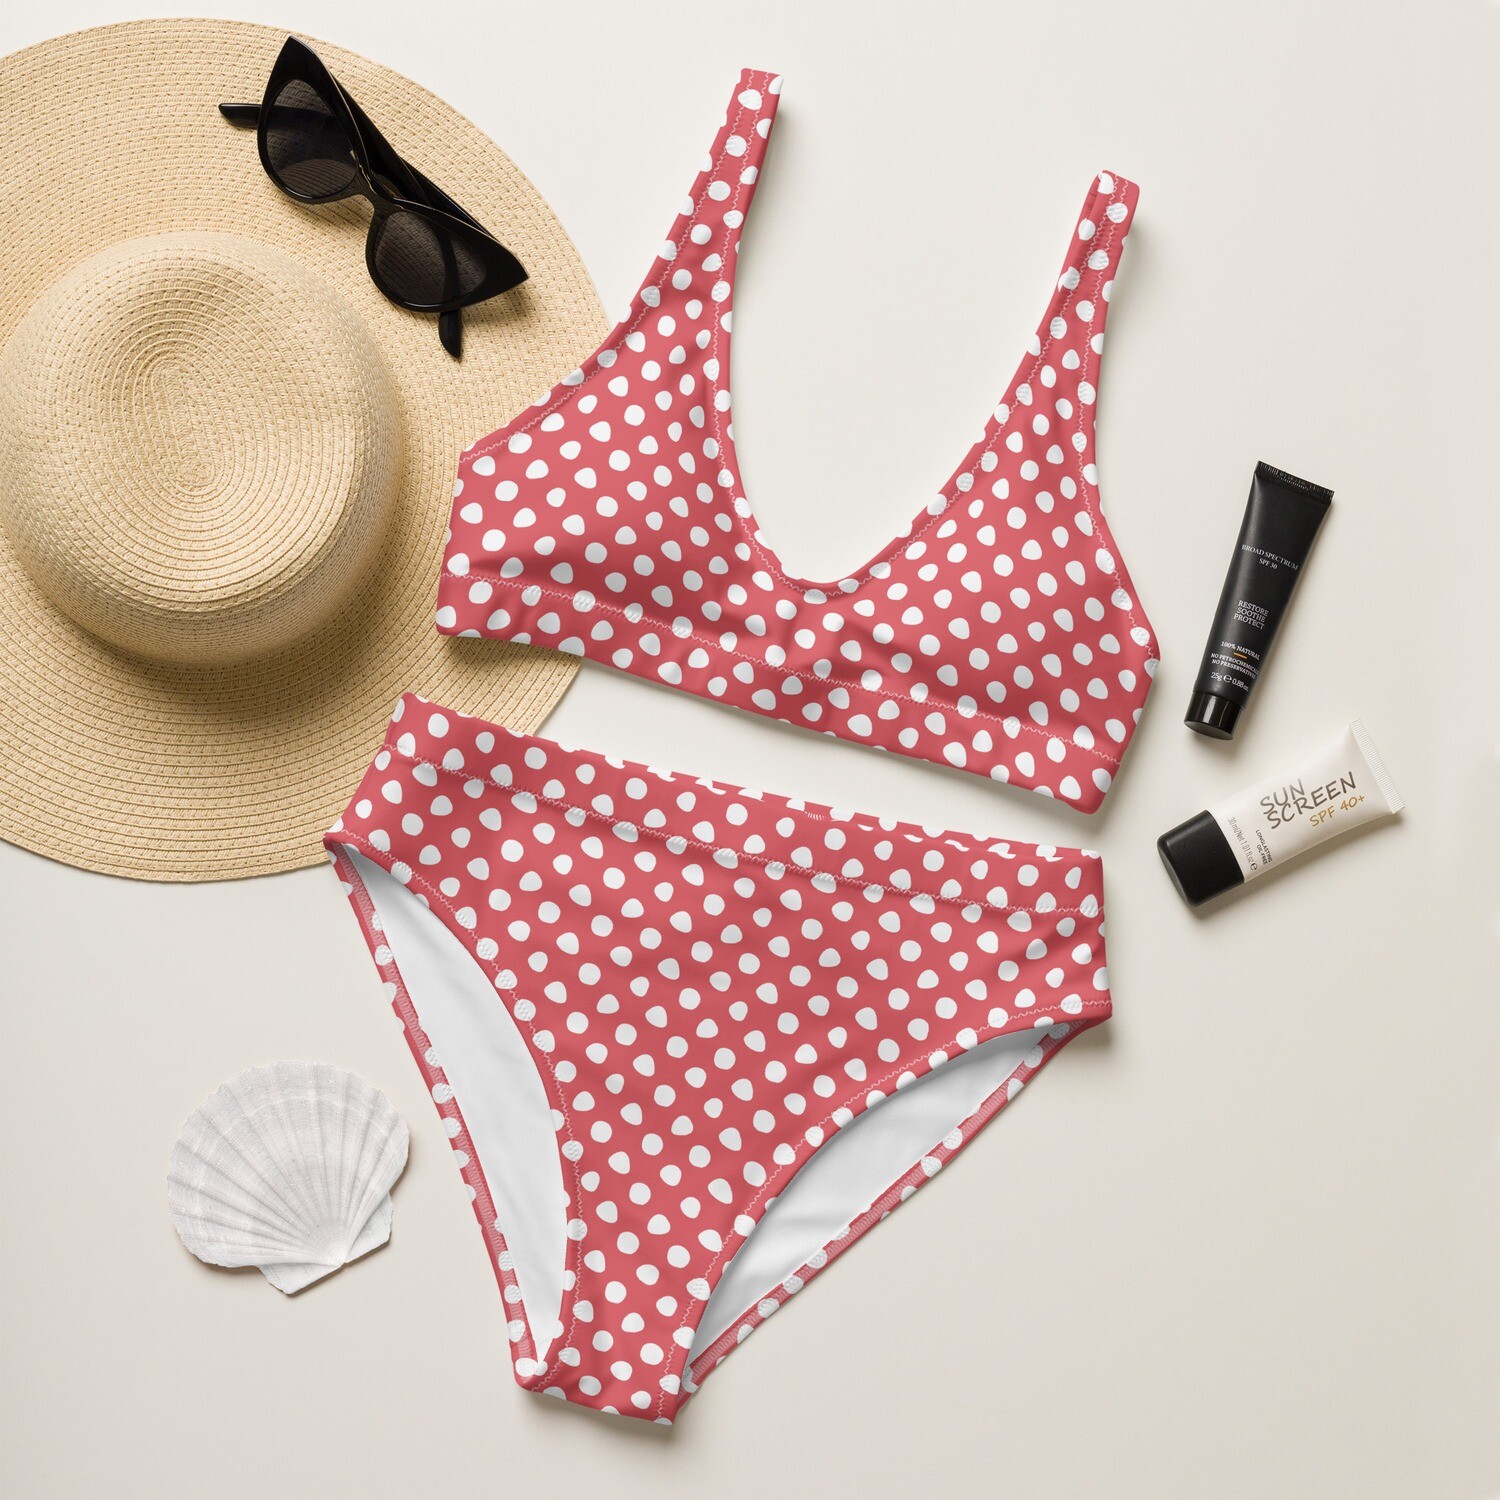 Retro red recycled high-waisted bikini with white polka dots in sizes XS-3XL